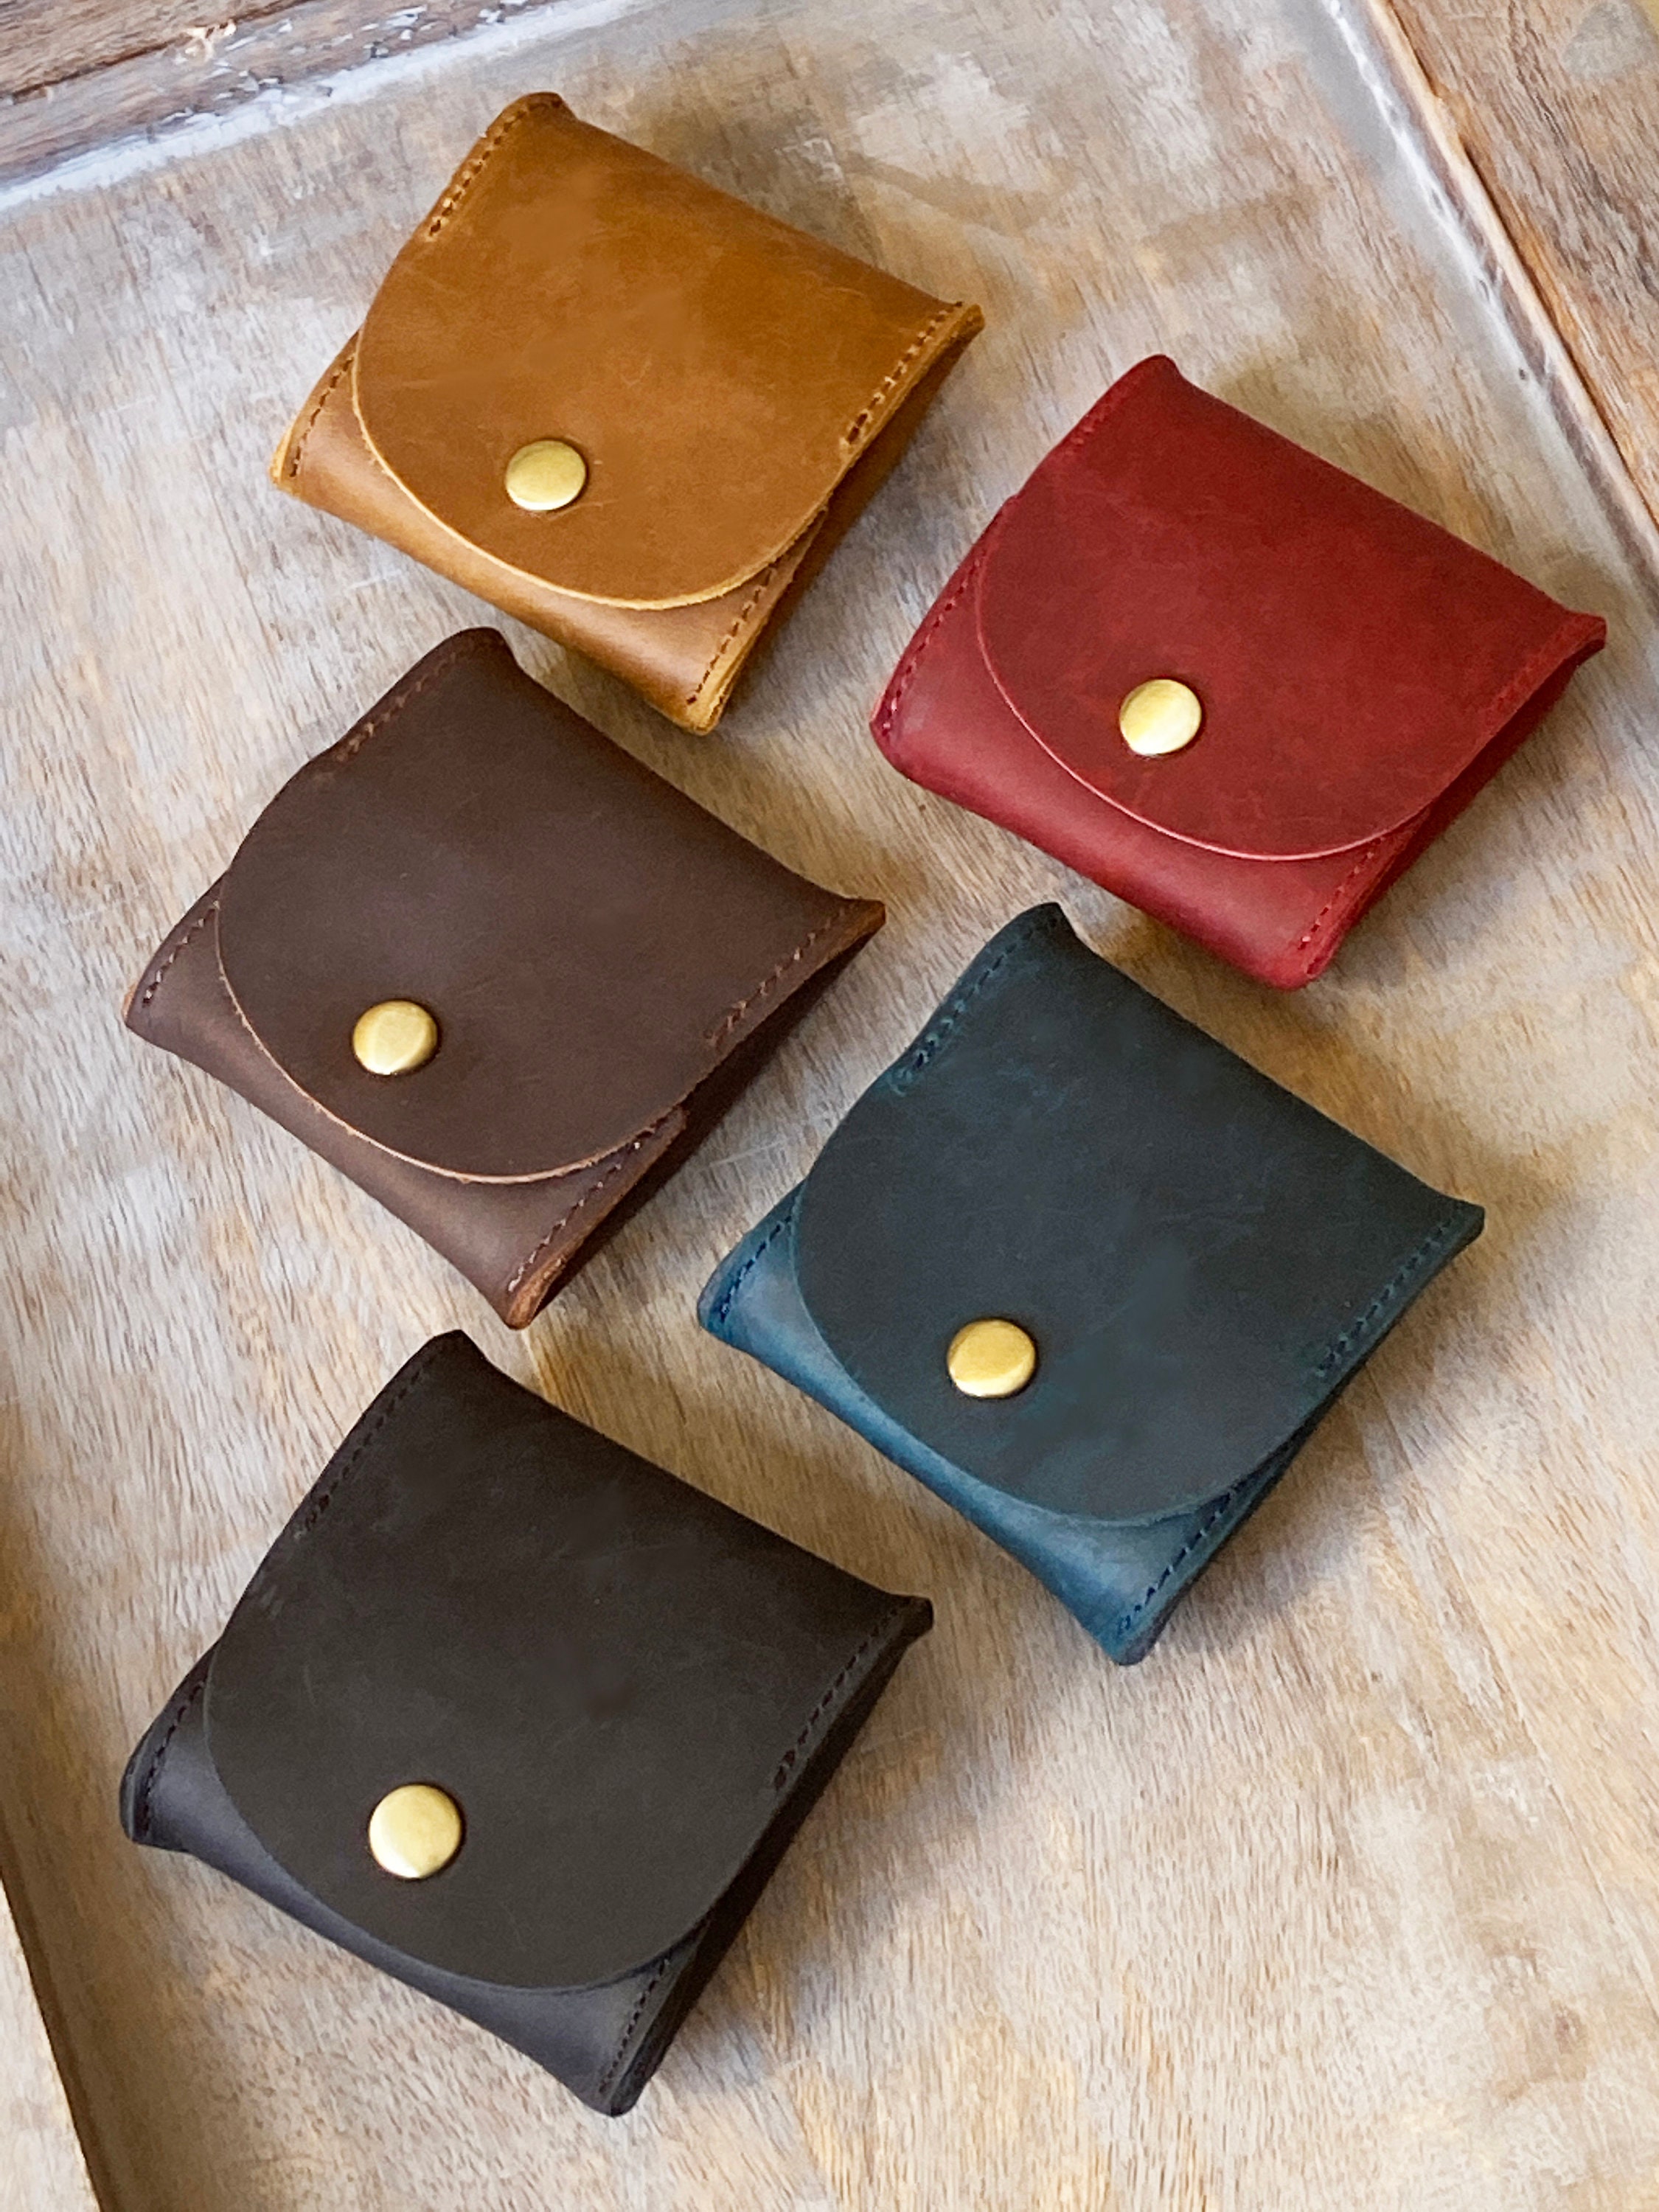 Pochette Félicie, Women's Small Leather Goods